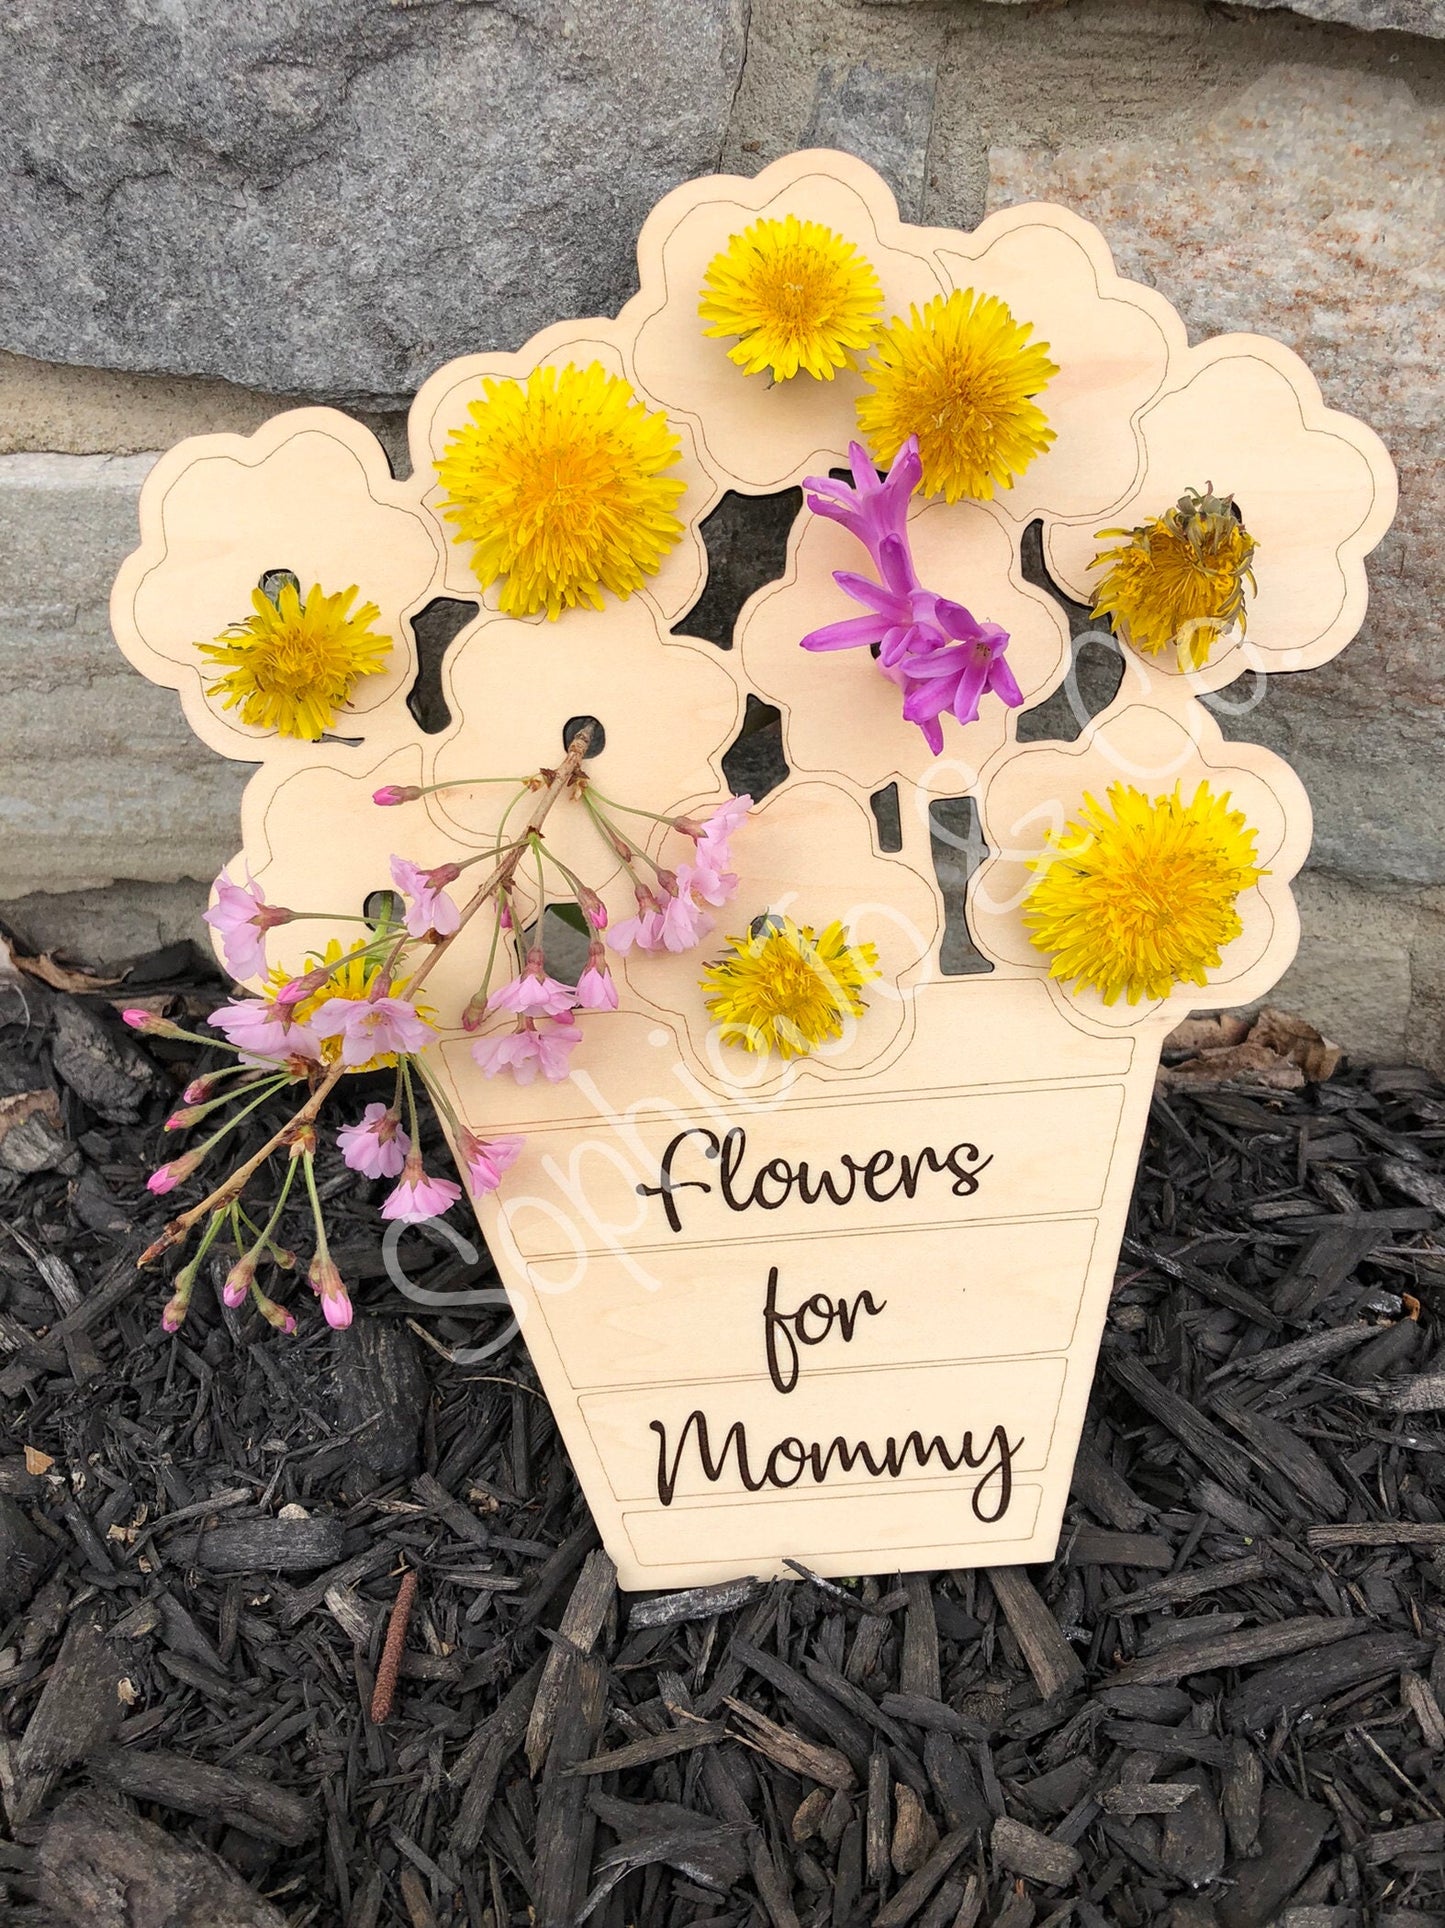 Flowers for Mommy Make Your Own Bouquet Flower Pot